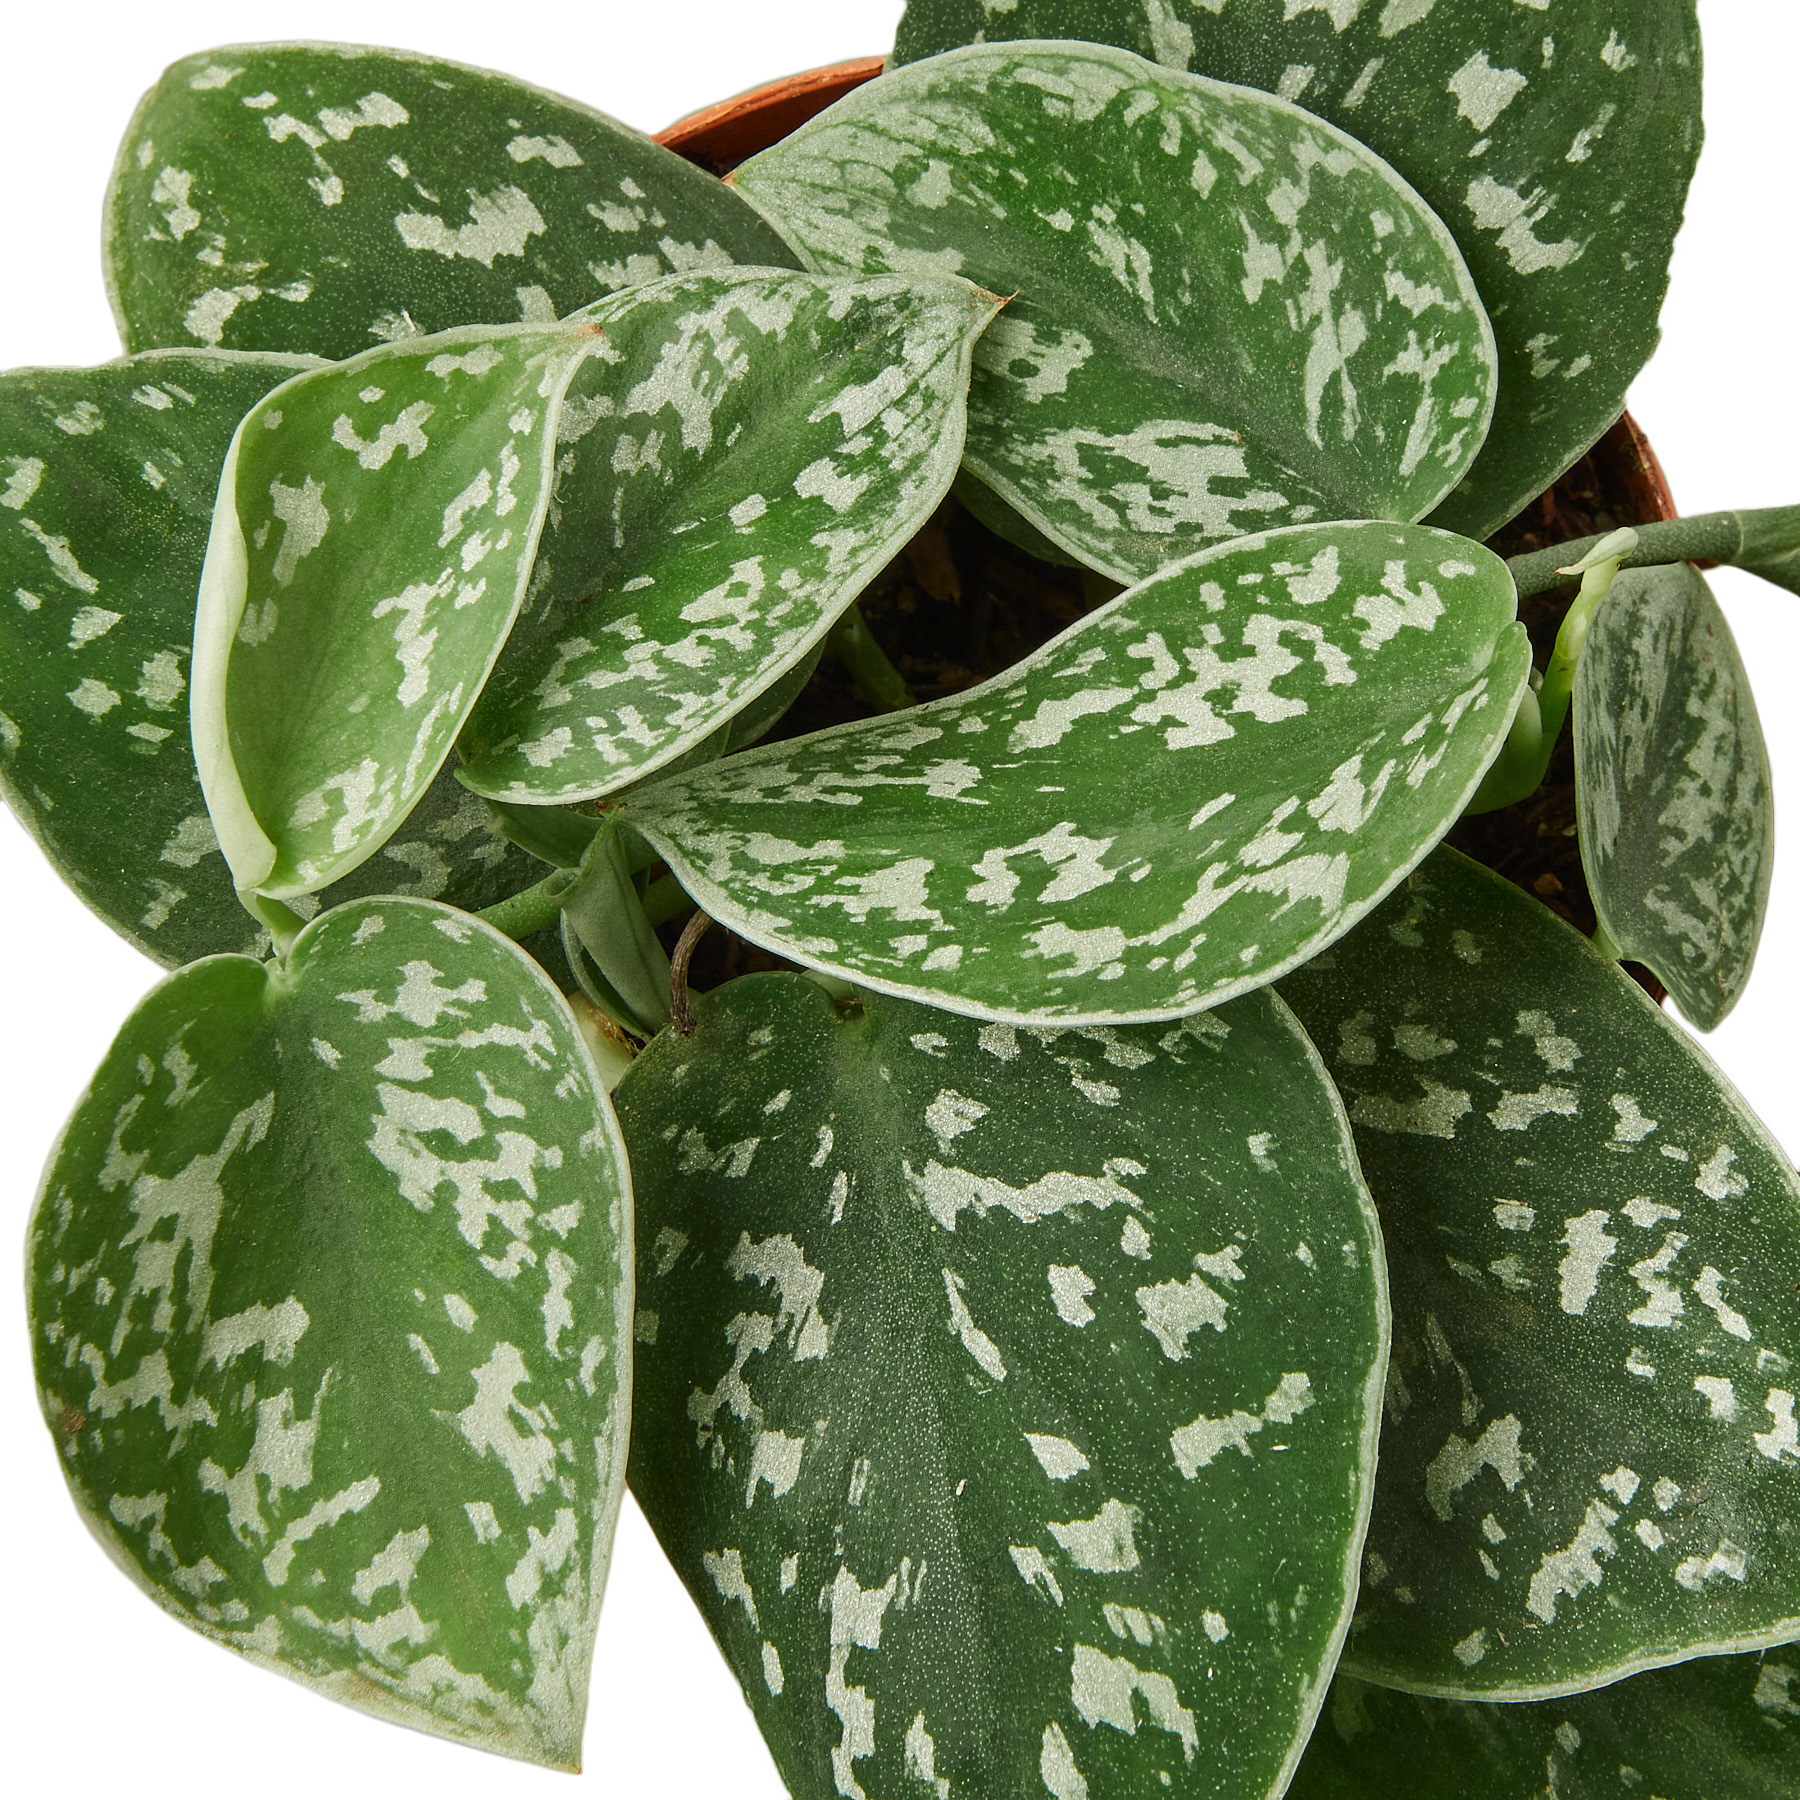 A stylish houseplant with white and green spots in a pot, available at a top garden center near me.